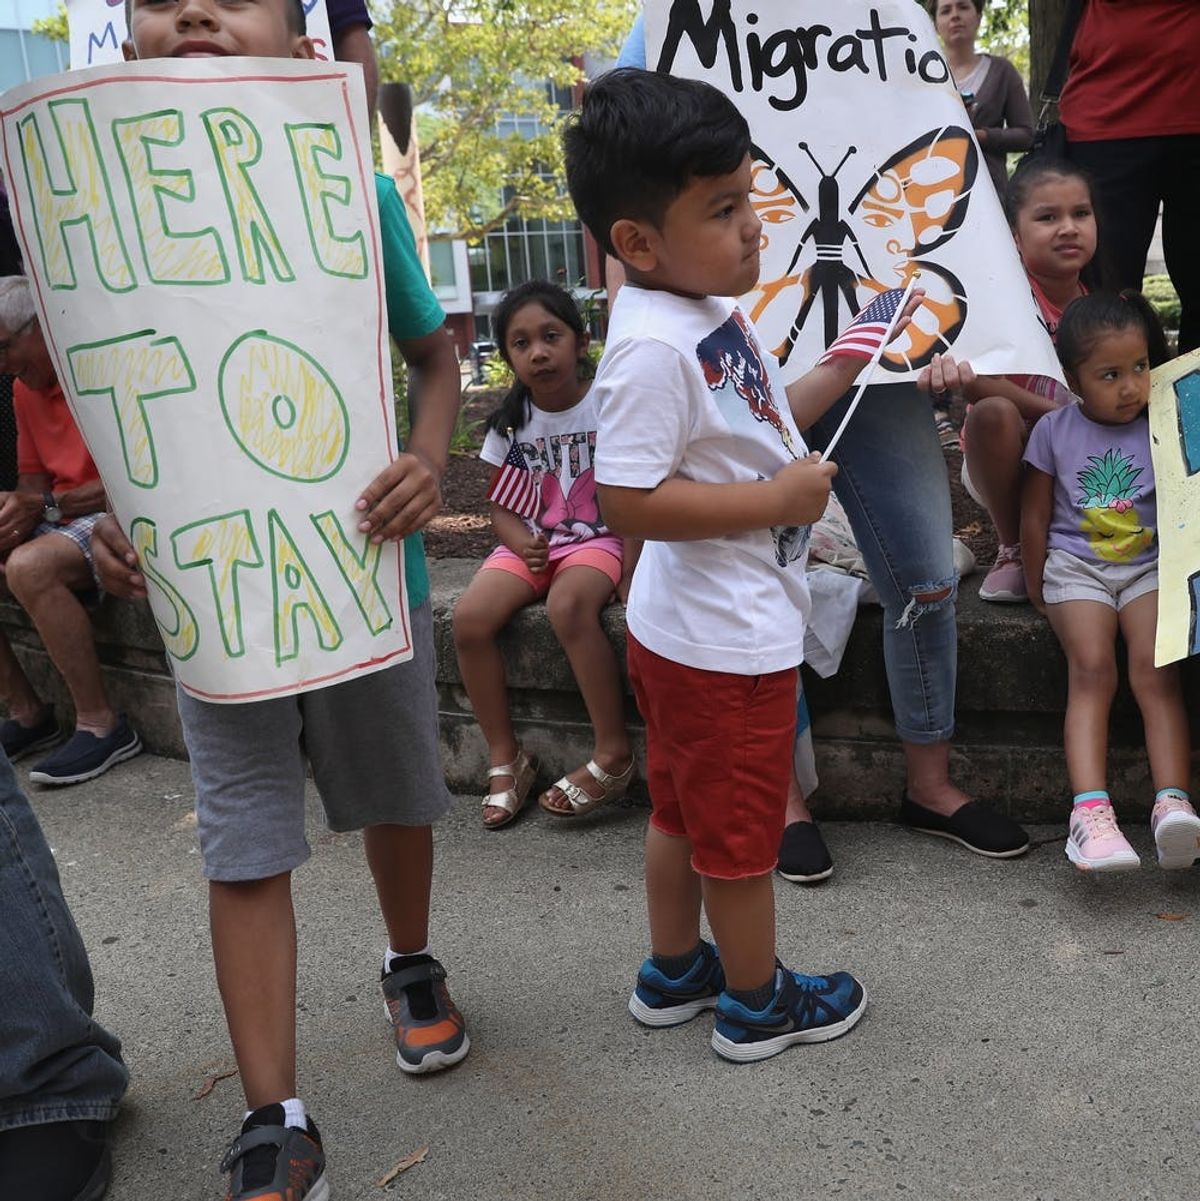 Breaking Down the Trump Administration’s Plan to Speed Up Migrant Family Reunification